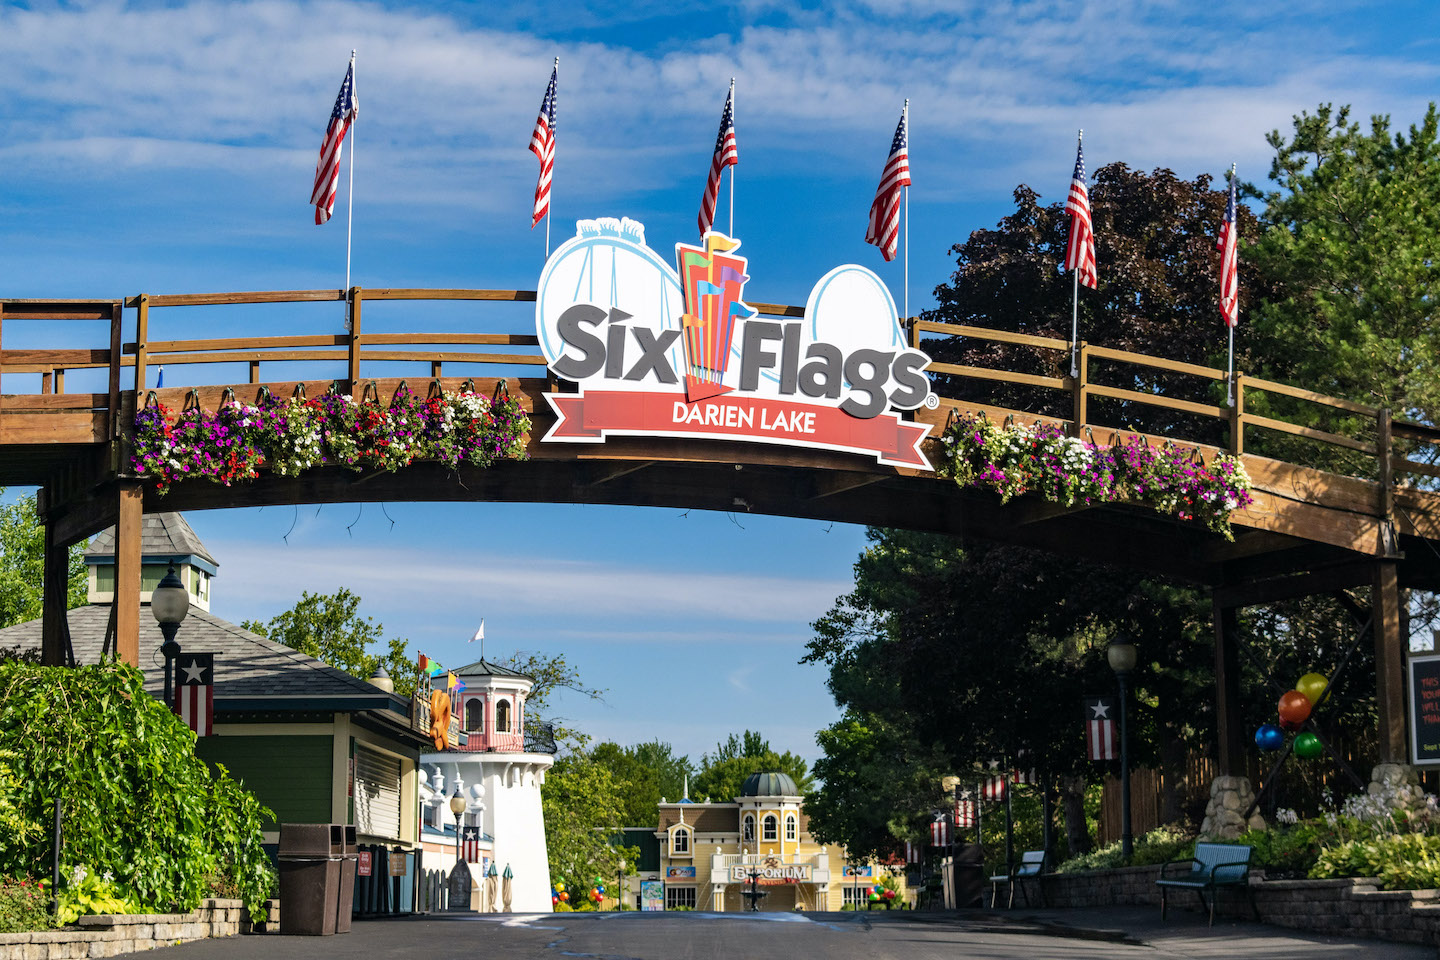 Six Flags Darien Lake opening with new offerings (including VIP lounge)